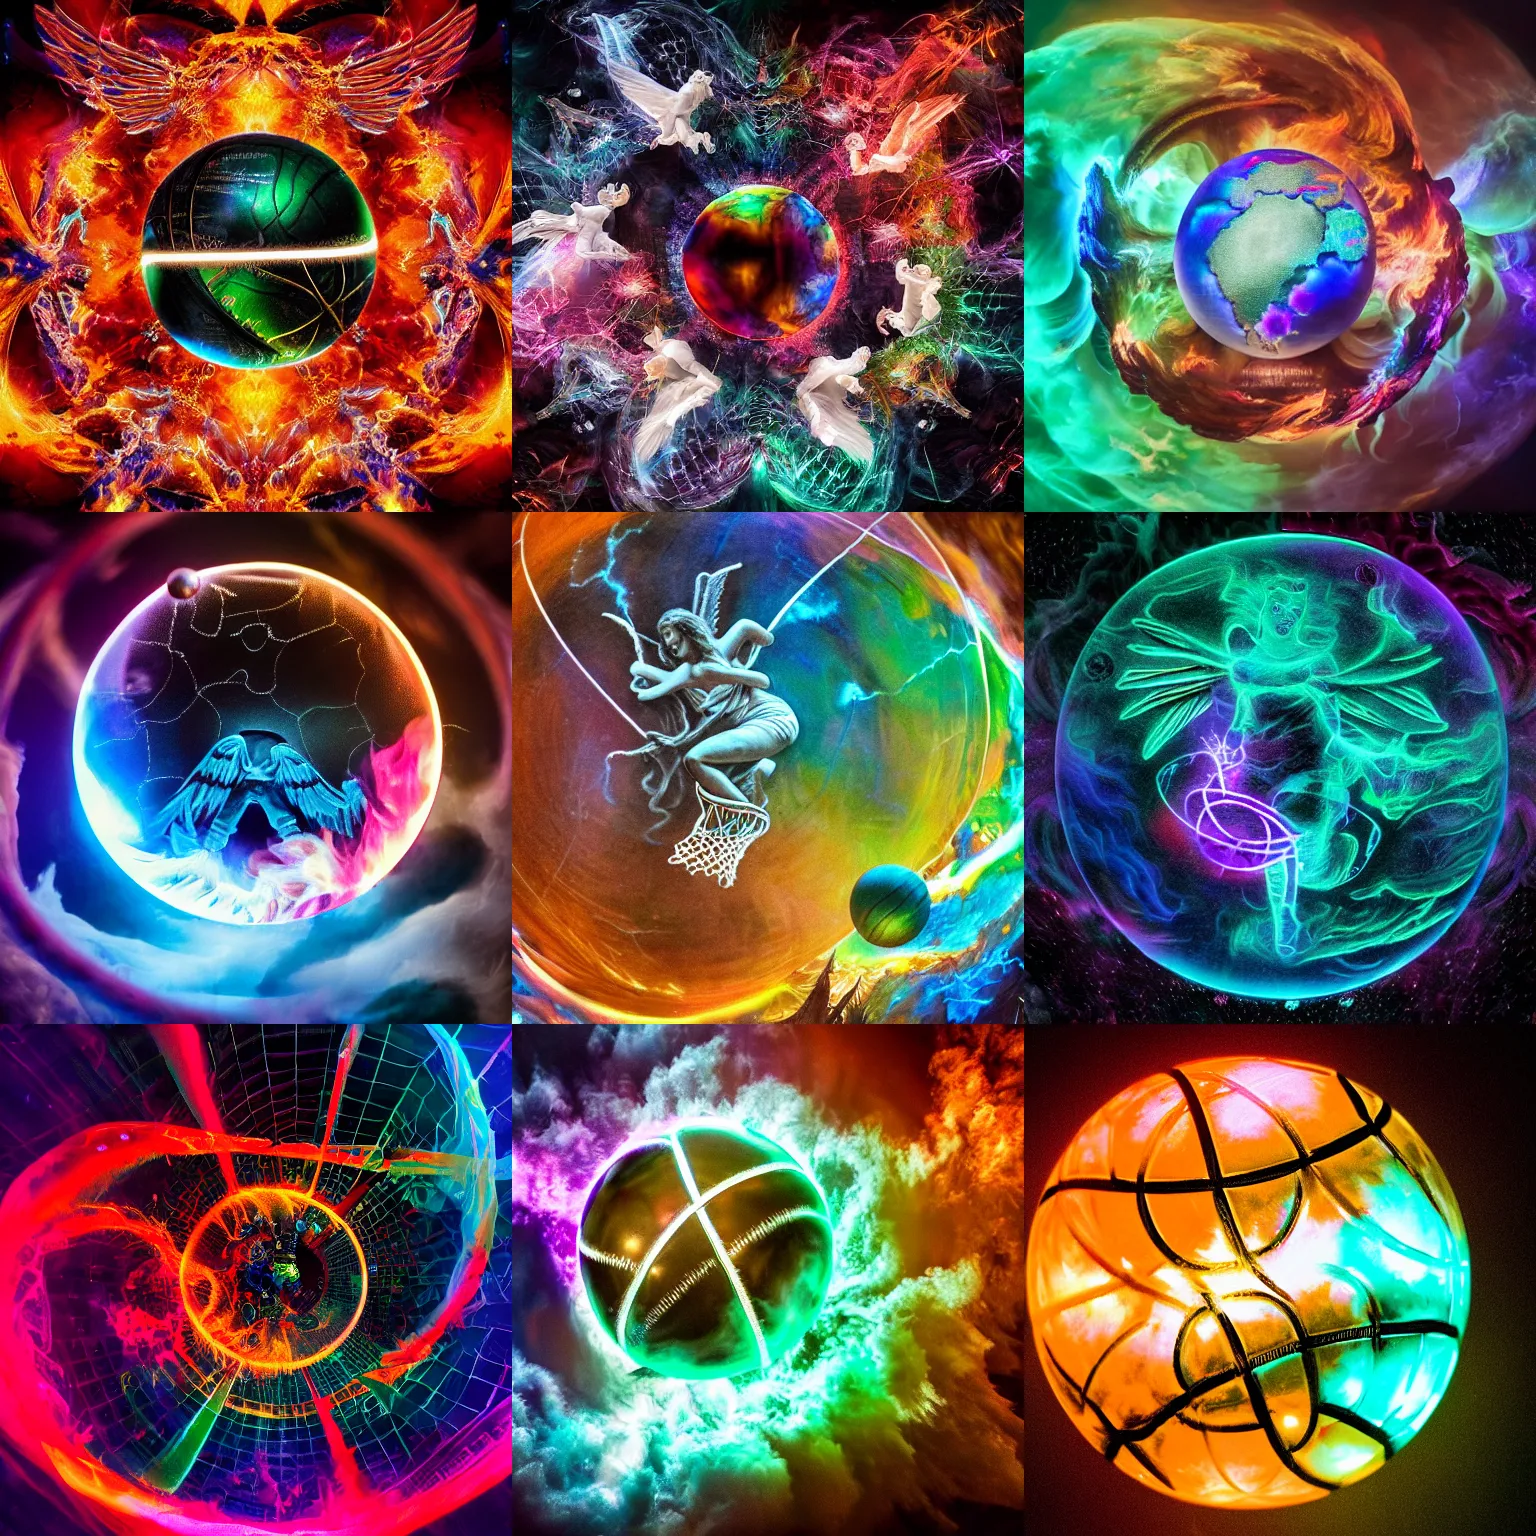 Prompt: /imagine prompt: Angels playing basketball, hell and heaven, hate, Filmic, Nikon D750, Exposure, Tones of Black, 4-Dimensional, Super-Resolution, Nonagon, Angelic, Yin Yang, Plasma Globe, Quantum Dot Display, Ruby, Sapphire, Emerald, Lumen Reflections, Twisted Rays, insanely detailed and intricate, hypermaximalist, elegant, ornate, hyper realistic, super detailed